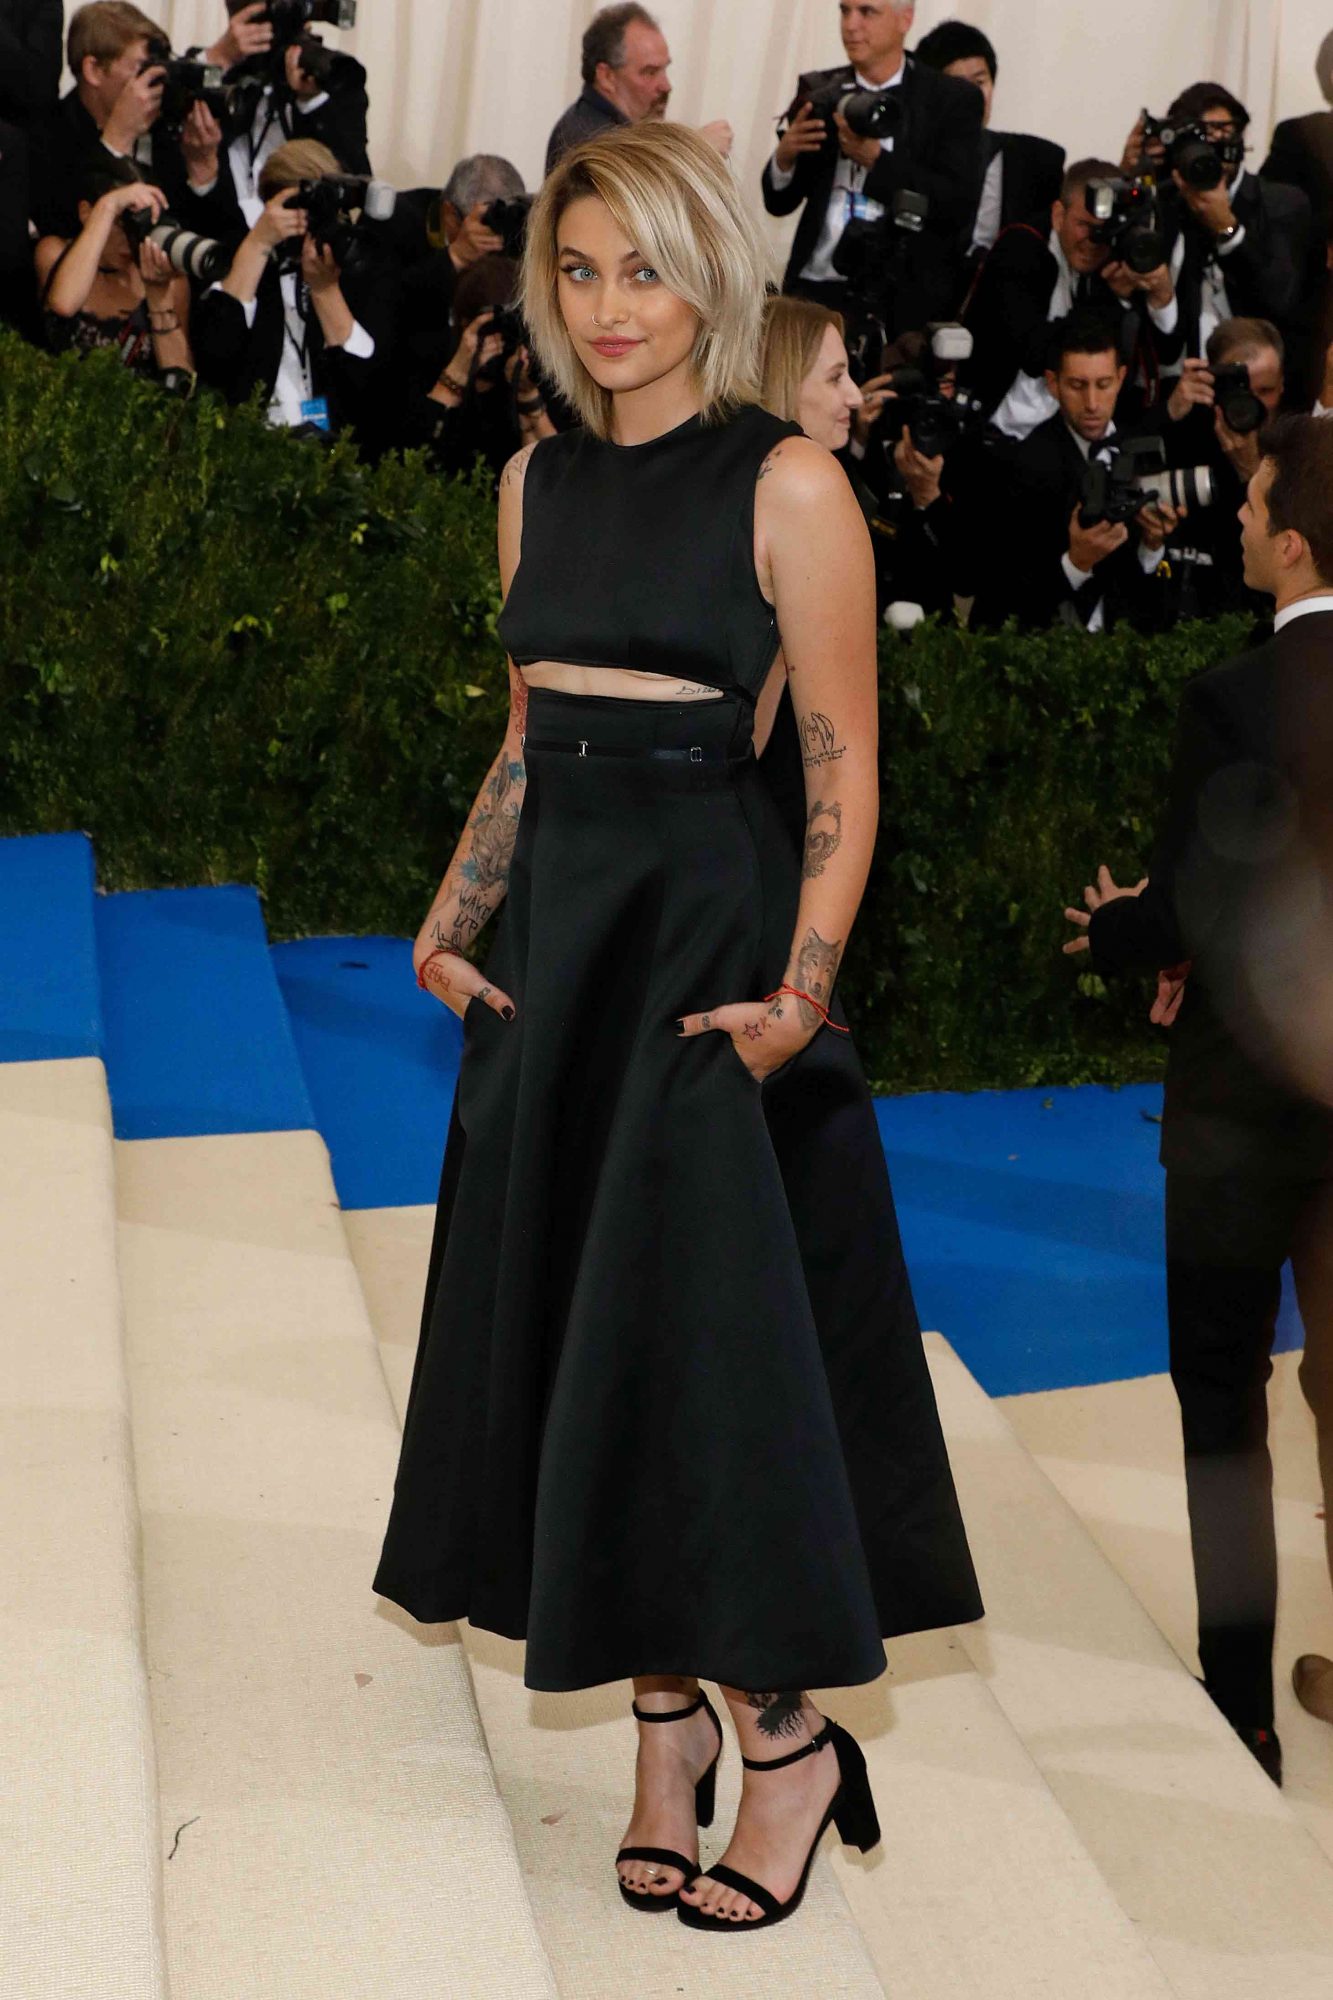 Paris Jackson made a totally understated Met Gala debut, and her outfit ...